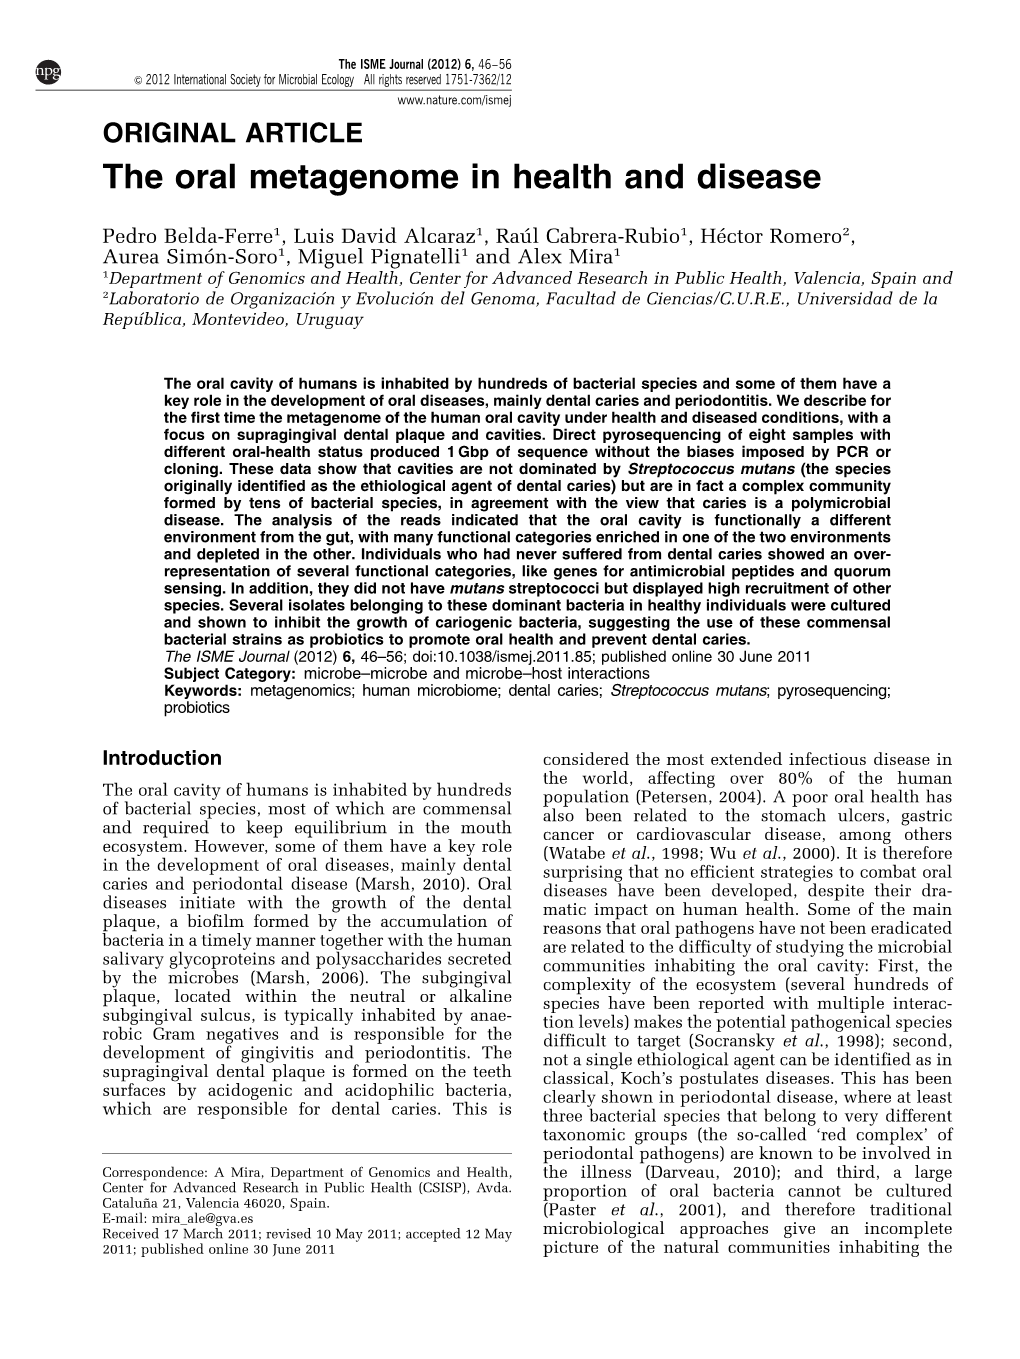 The Oral Metagenome in Health and Disease